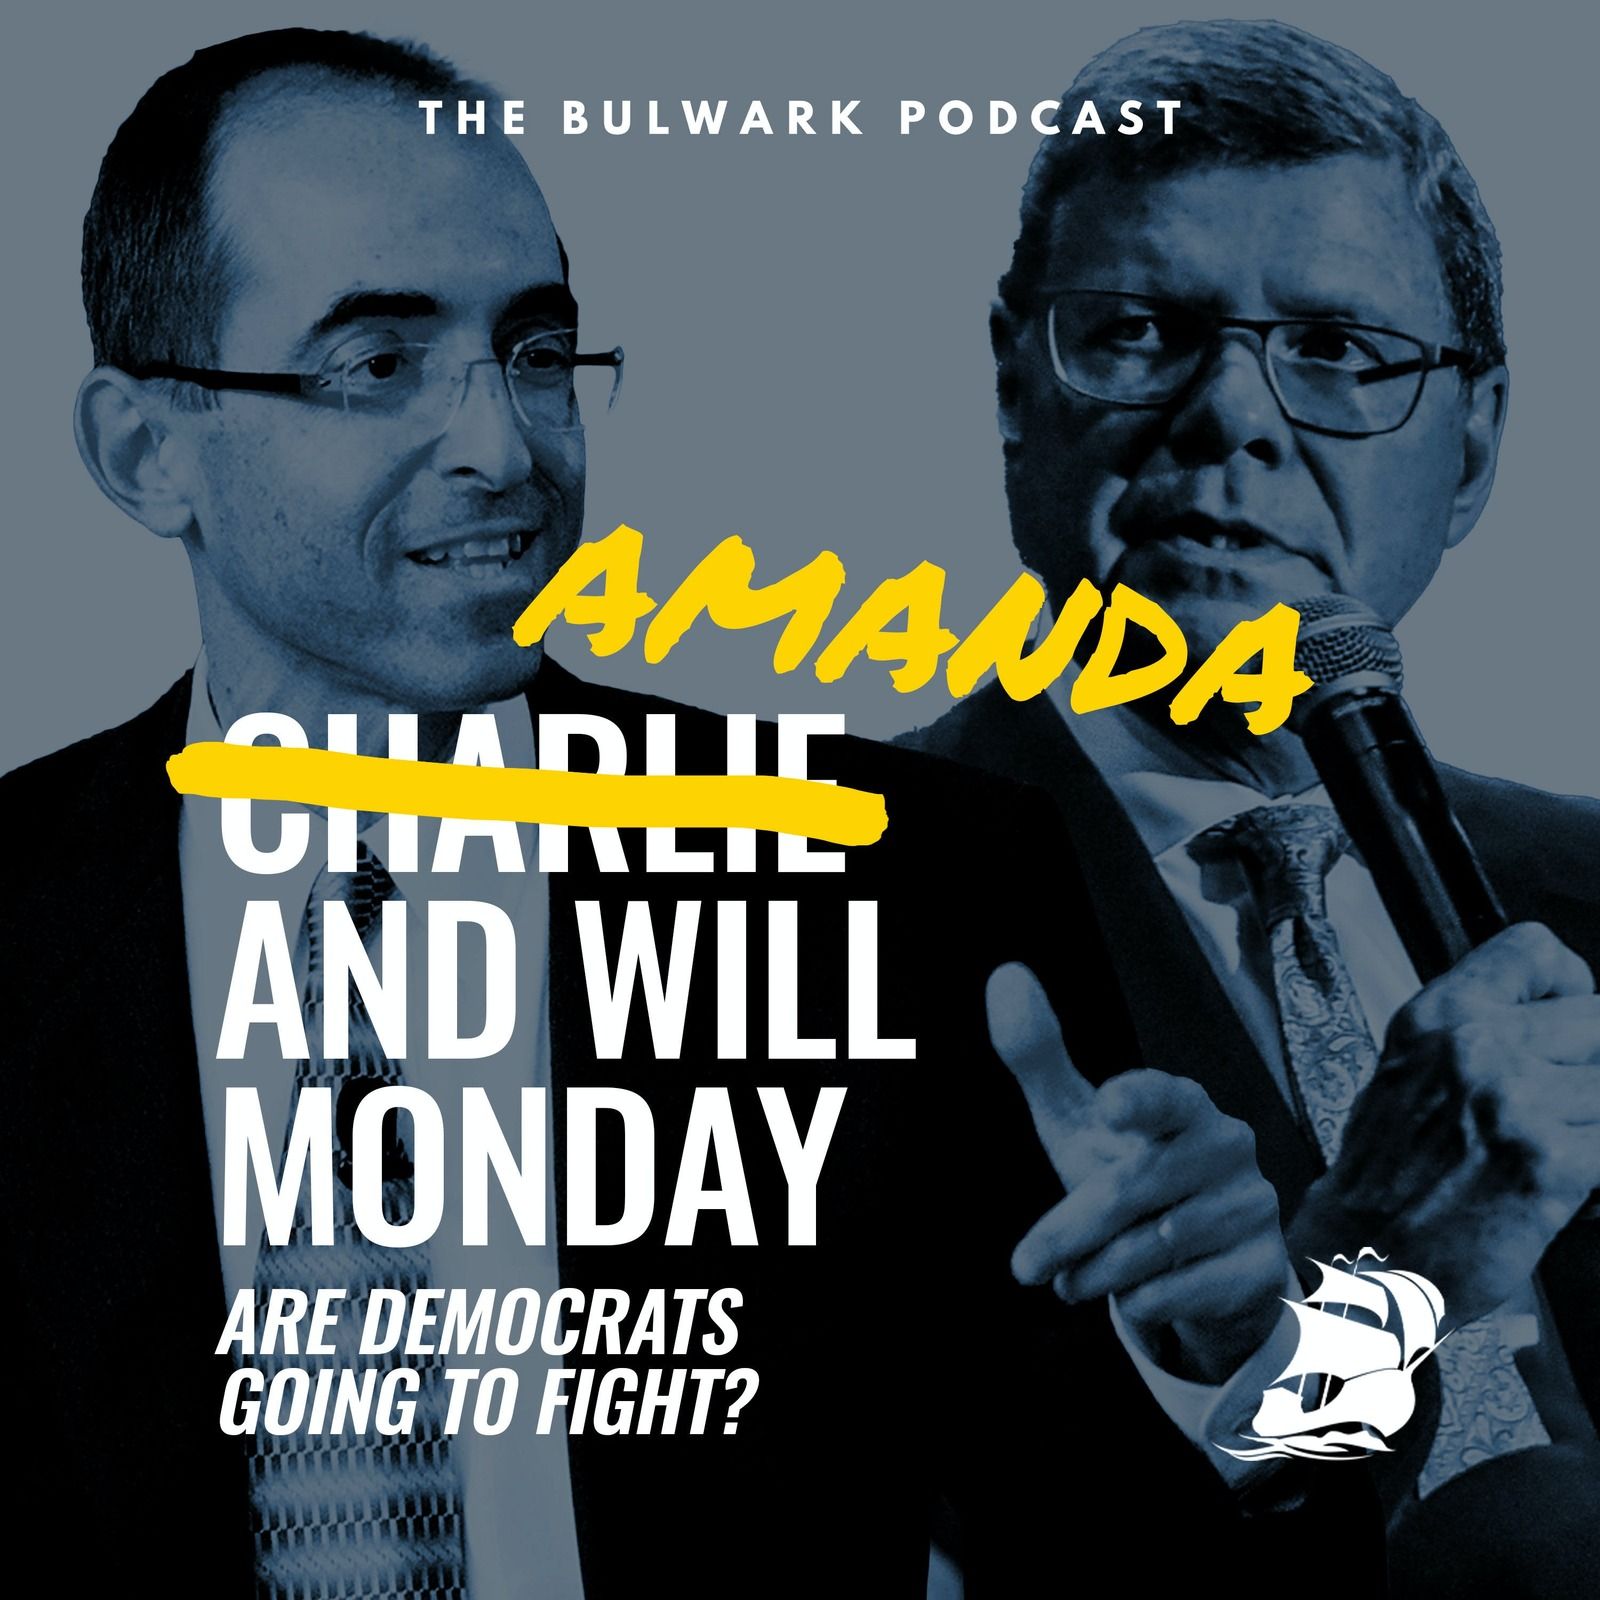 Will Saletan: Are Democrats Going to Fight? by The Bulwark Podcast